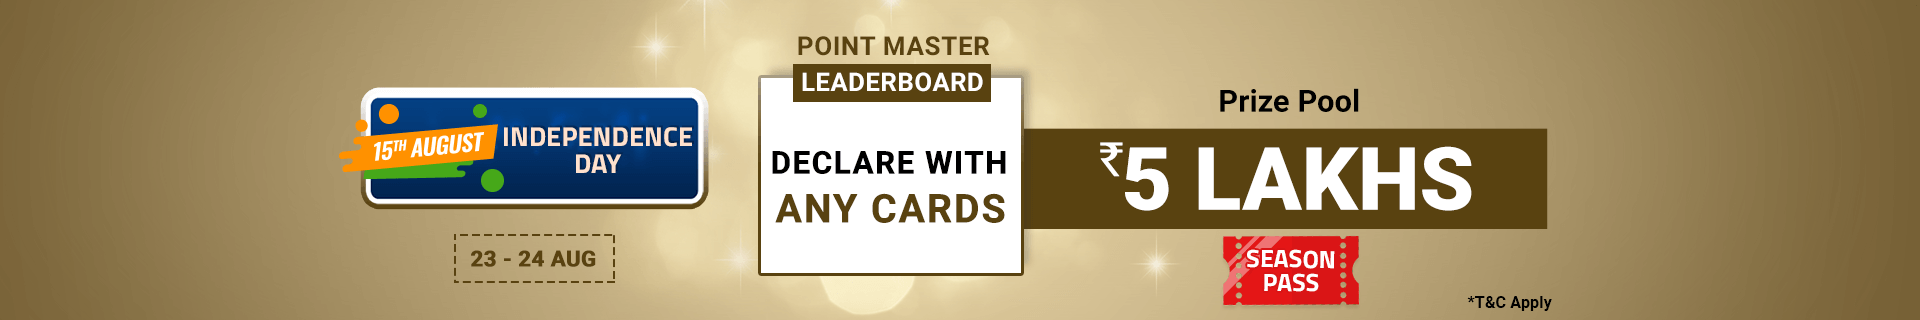 Rummy Leaderboard Contest